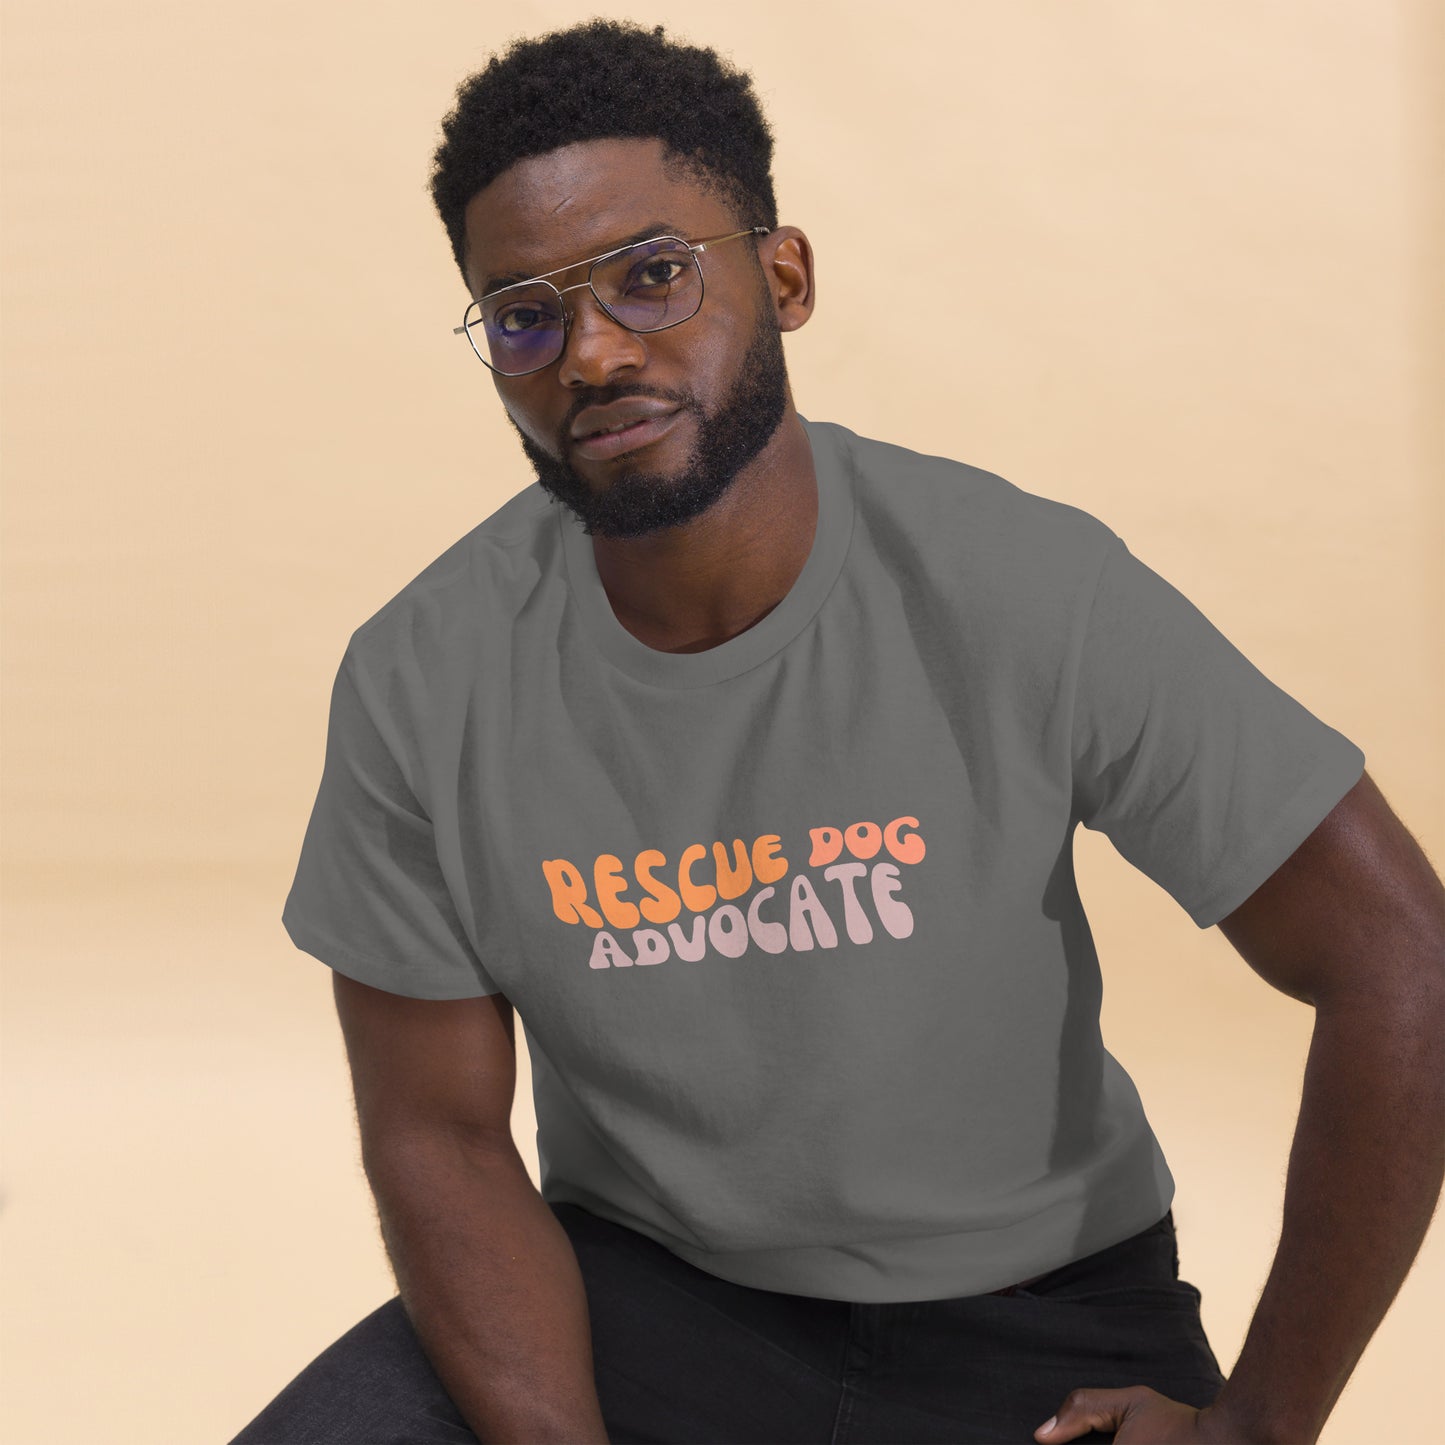 The Rescue Dog Advocate Tee